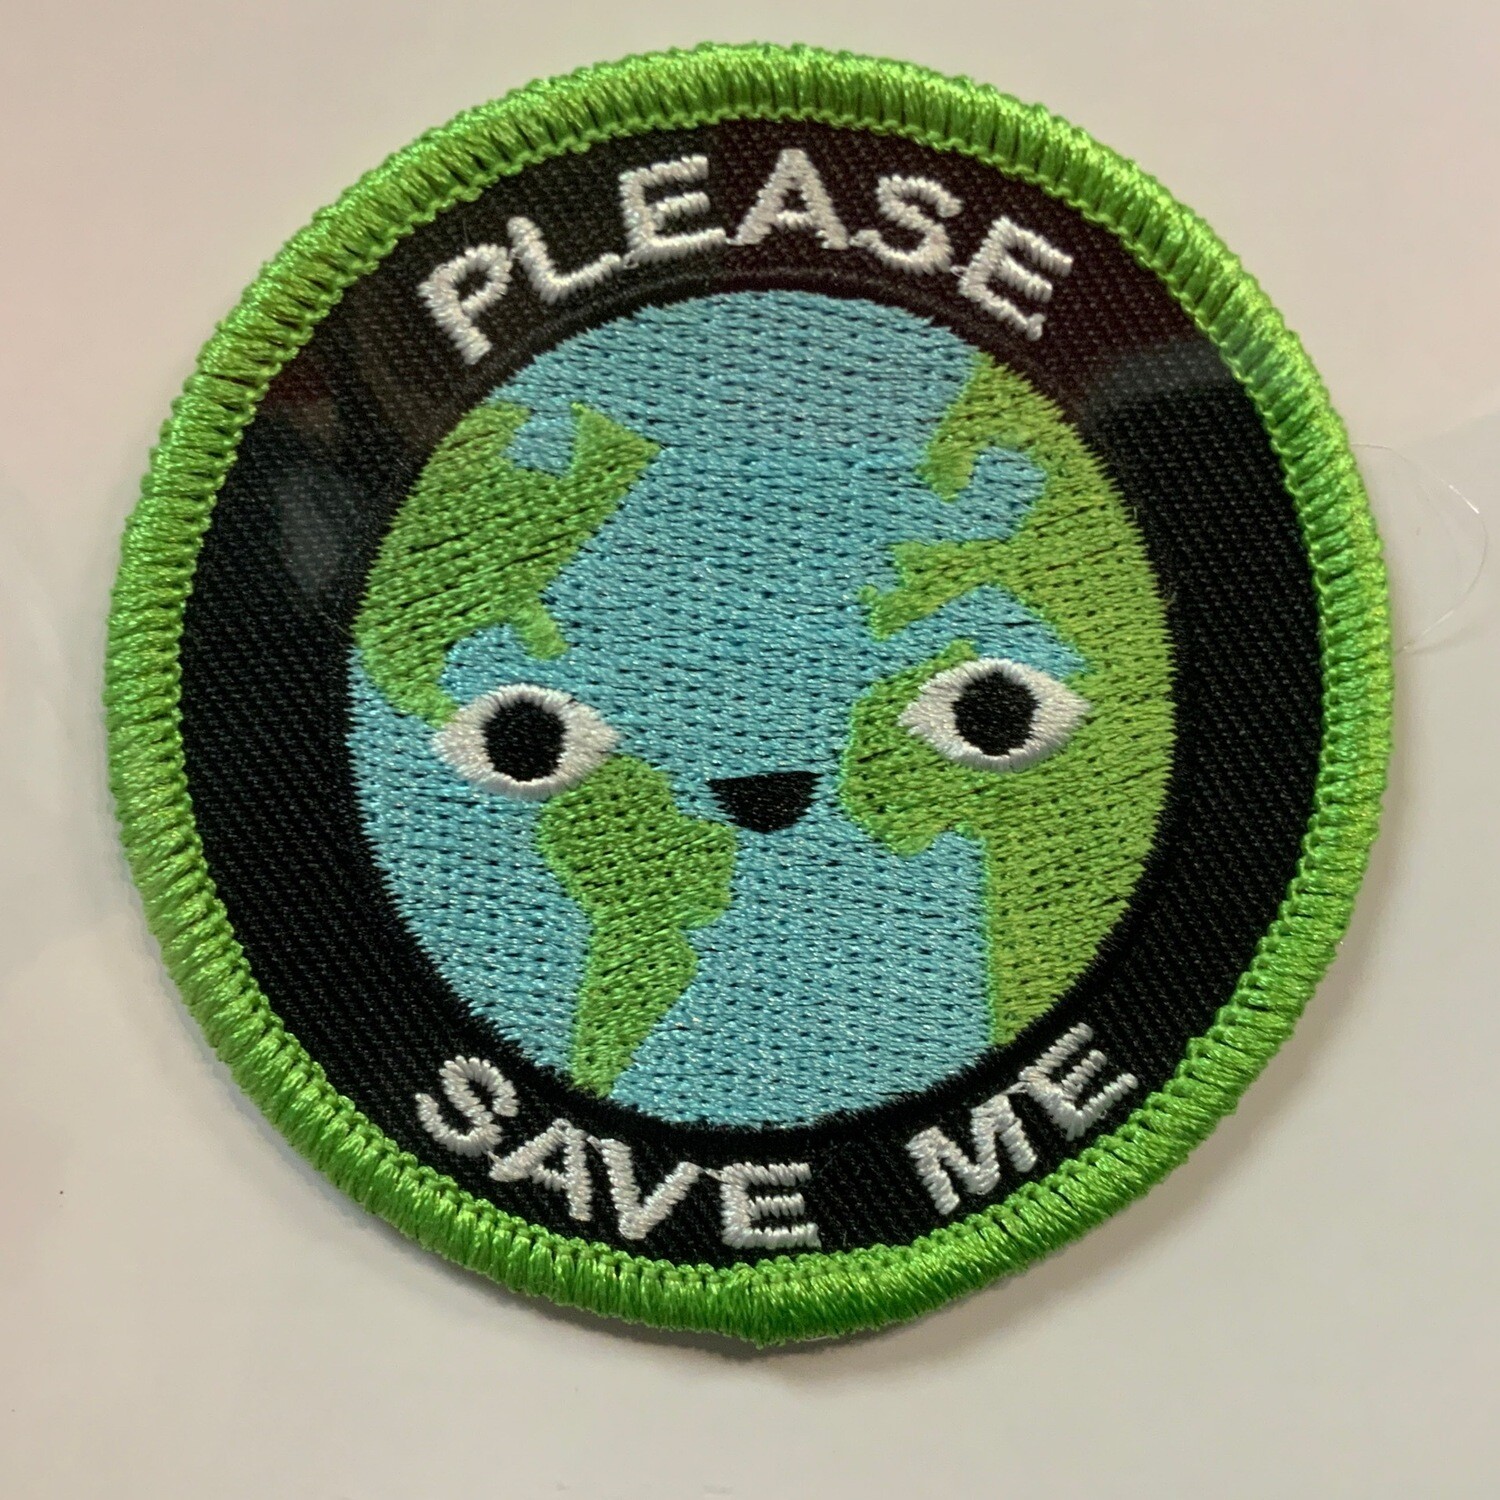 Please Save Me - Embroidered Patch from These Are Things